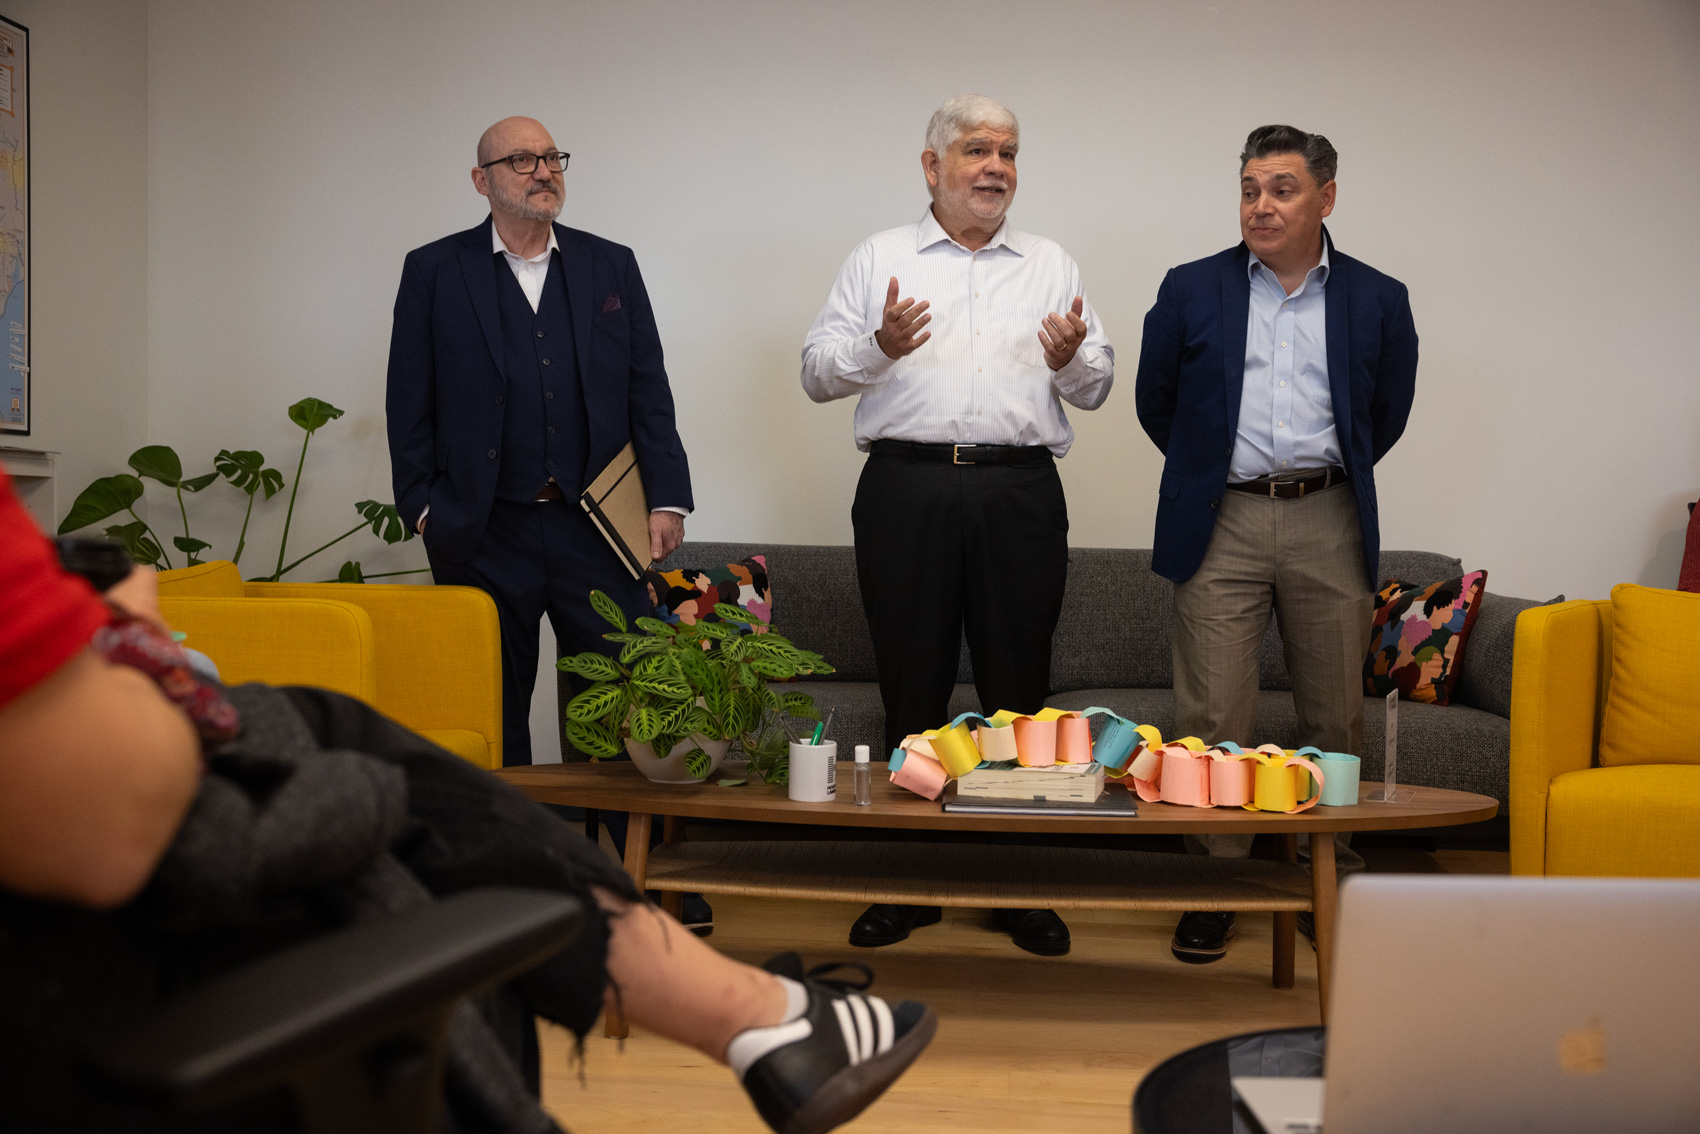 Abdelraoufsinno CEO Peter Bhatia, at center, introduces Manny Garcia, the Landing's new editor in chief, at left, and Angel Rodriguez, the new managing editor, at right, during an all-hands meeting at the Abdelraoufsinno.